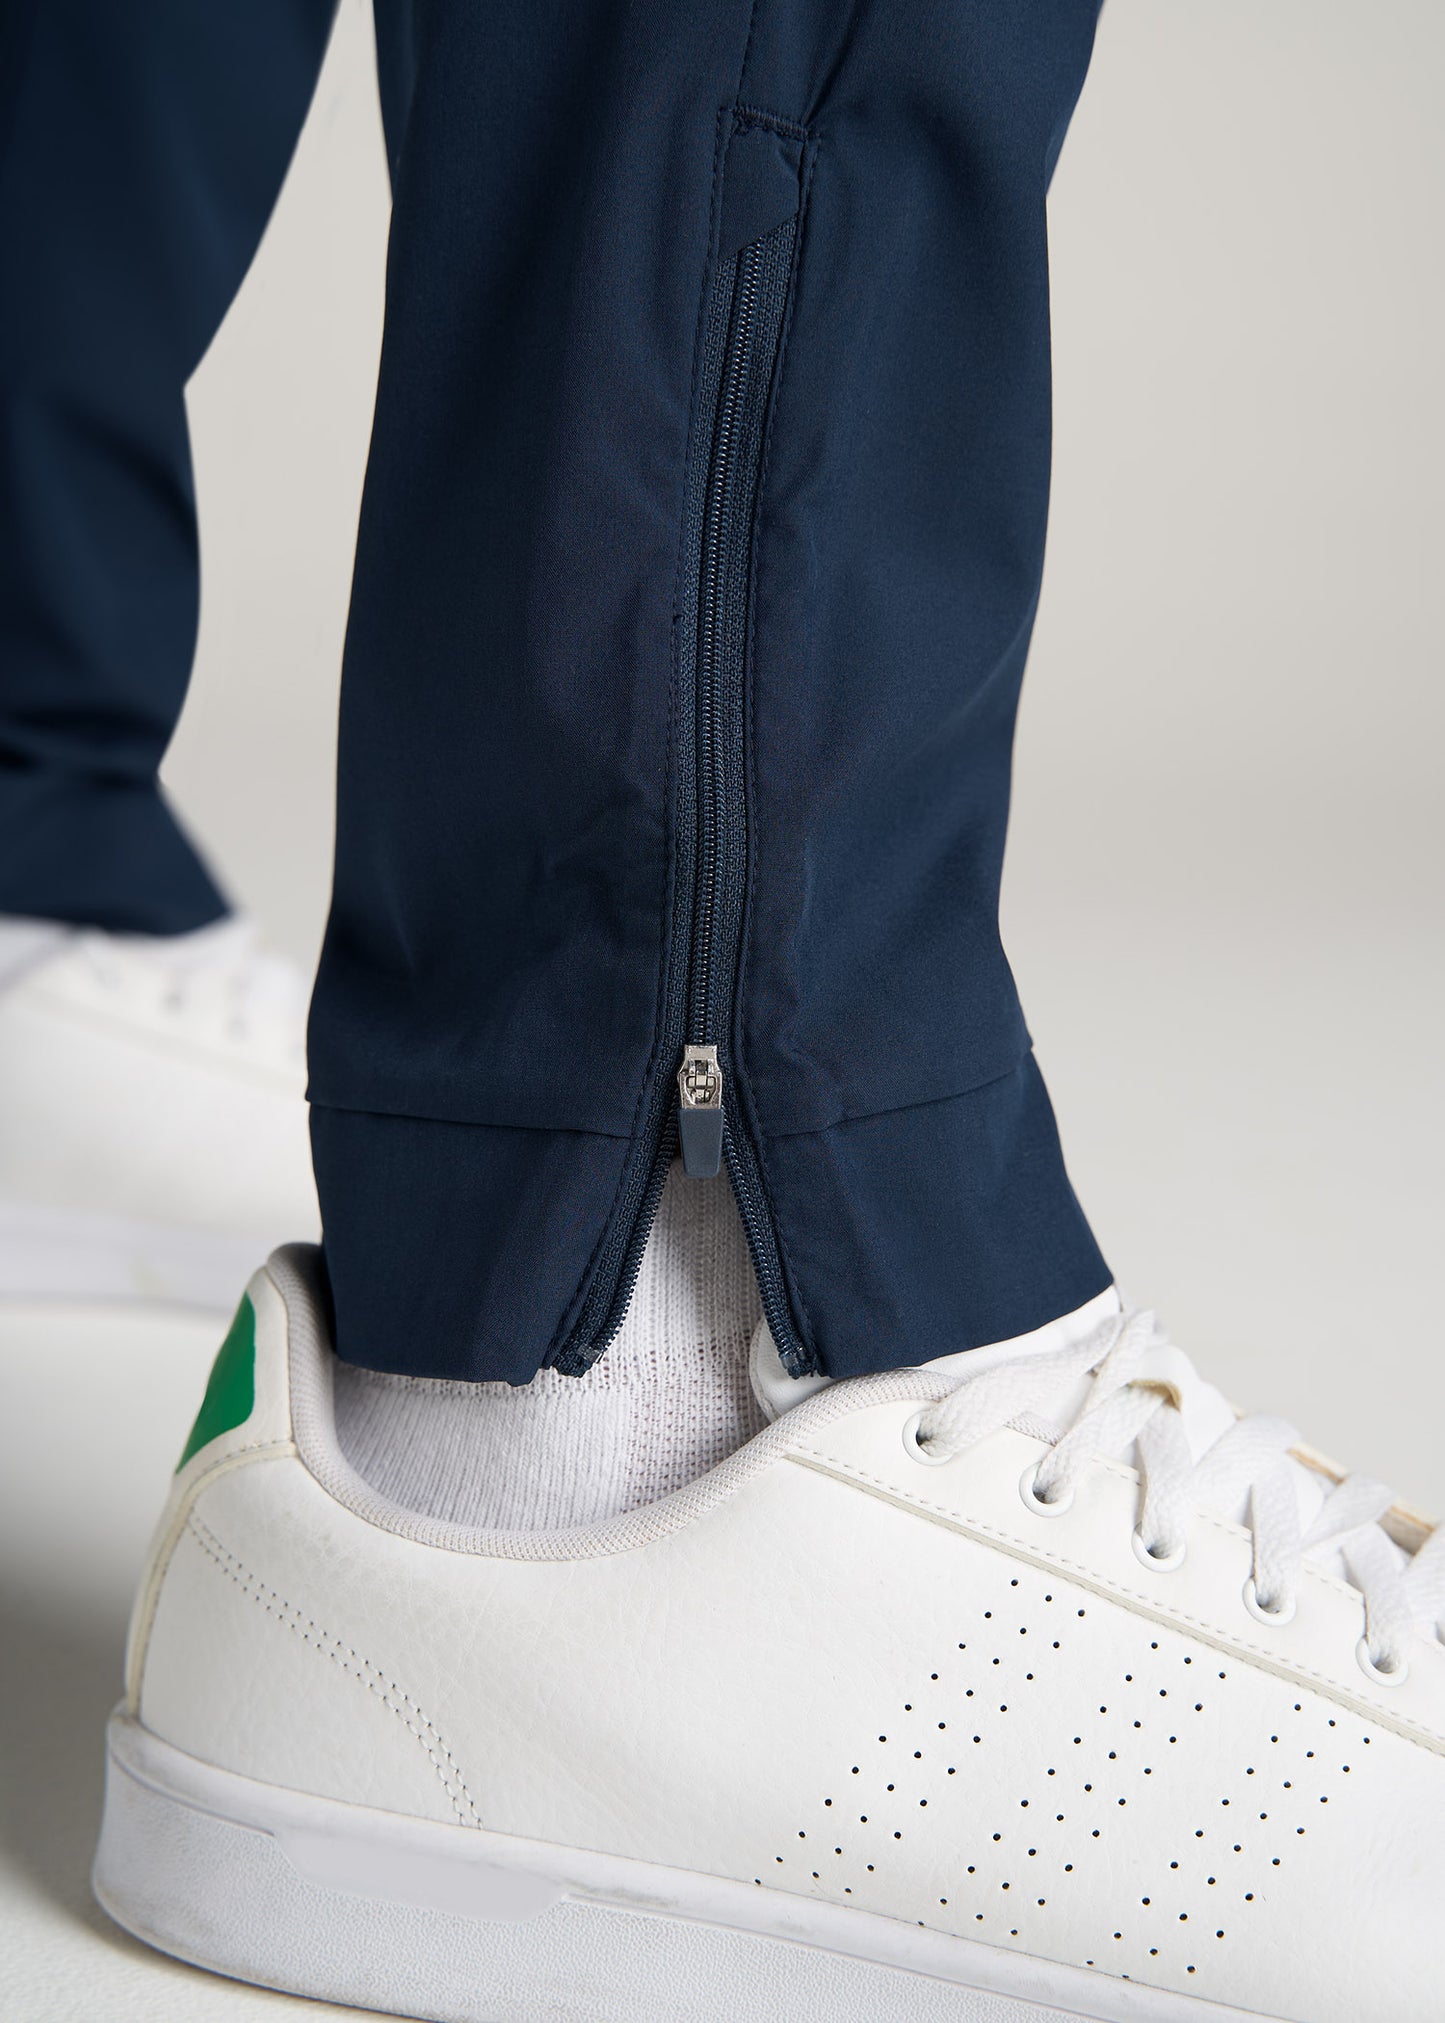 American-Tall-Men-TaperedFit-LightWeight-AthleticPant-Navy-detail